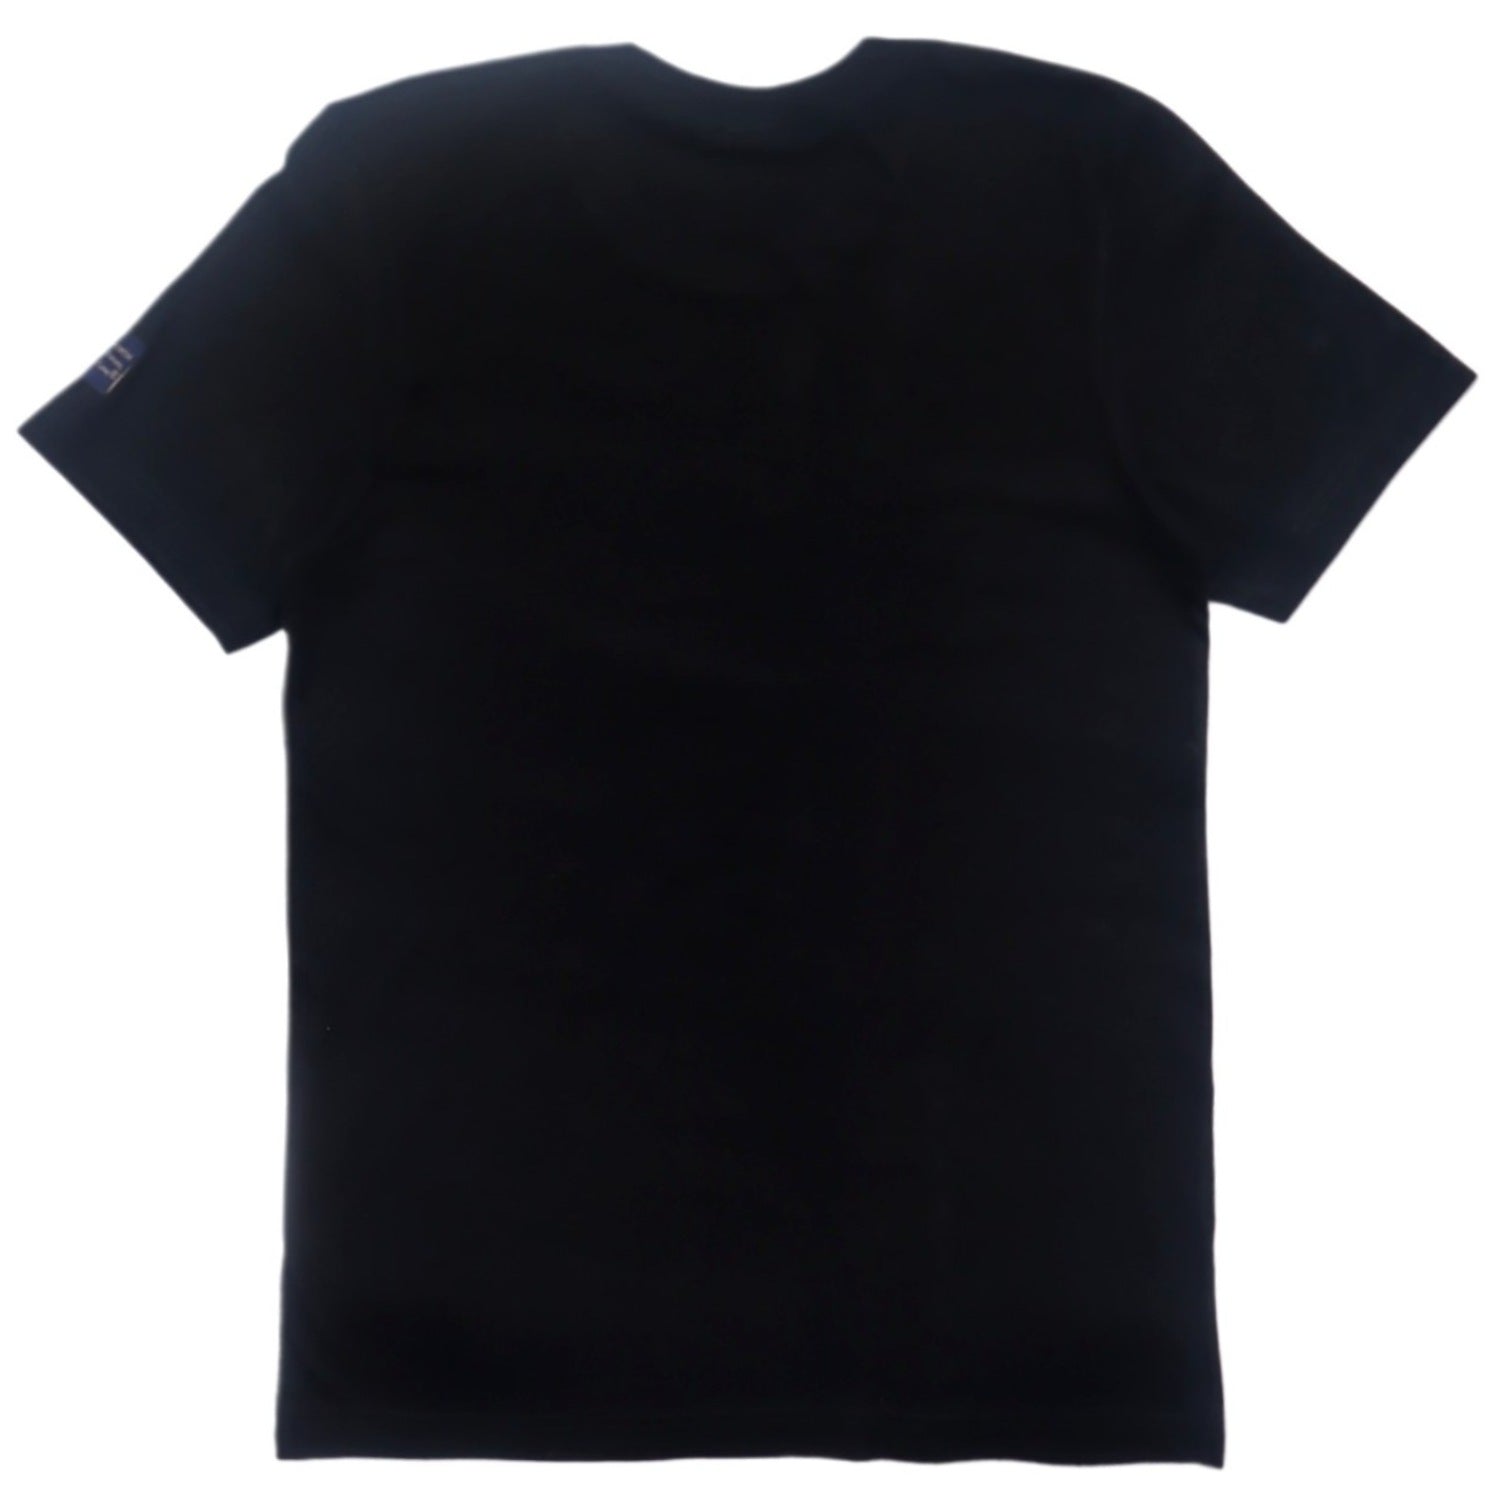 Black Short Sleeve Wave Perfected by Love Shirt Back